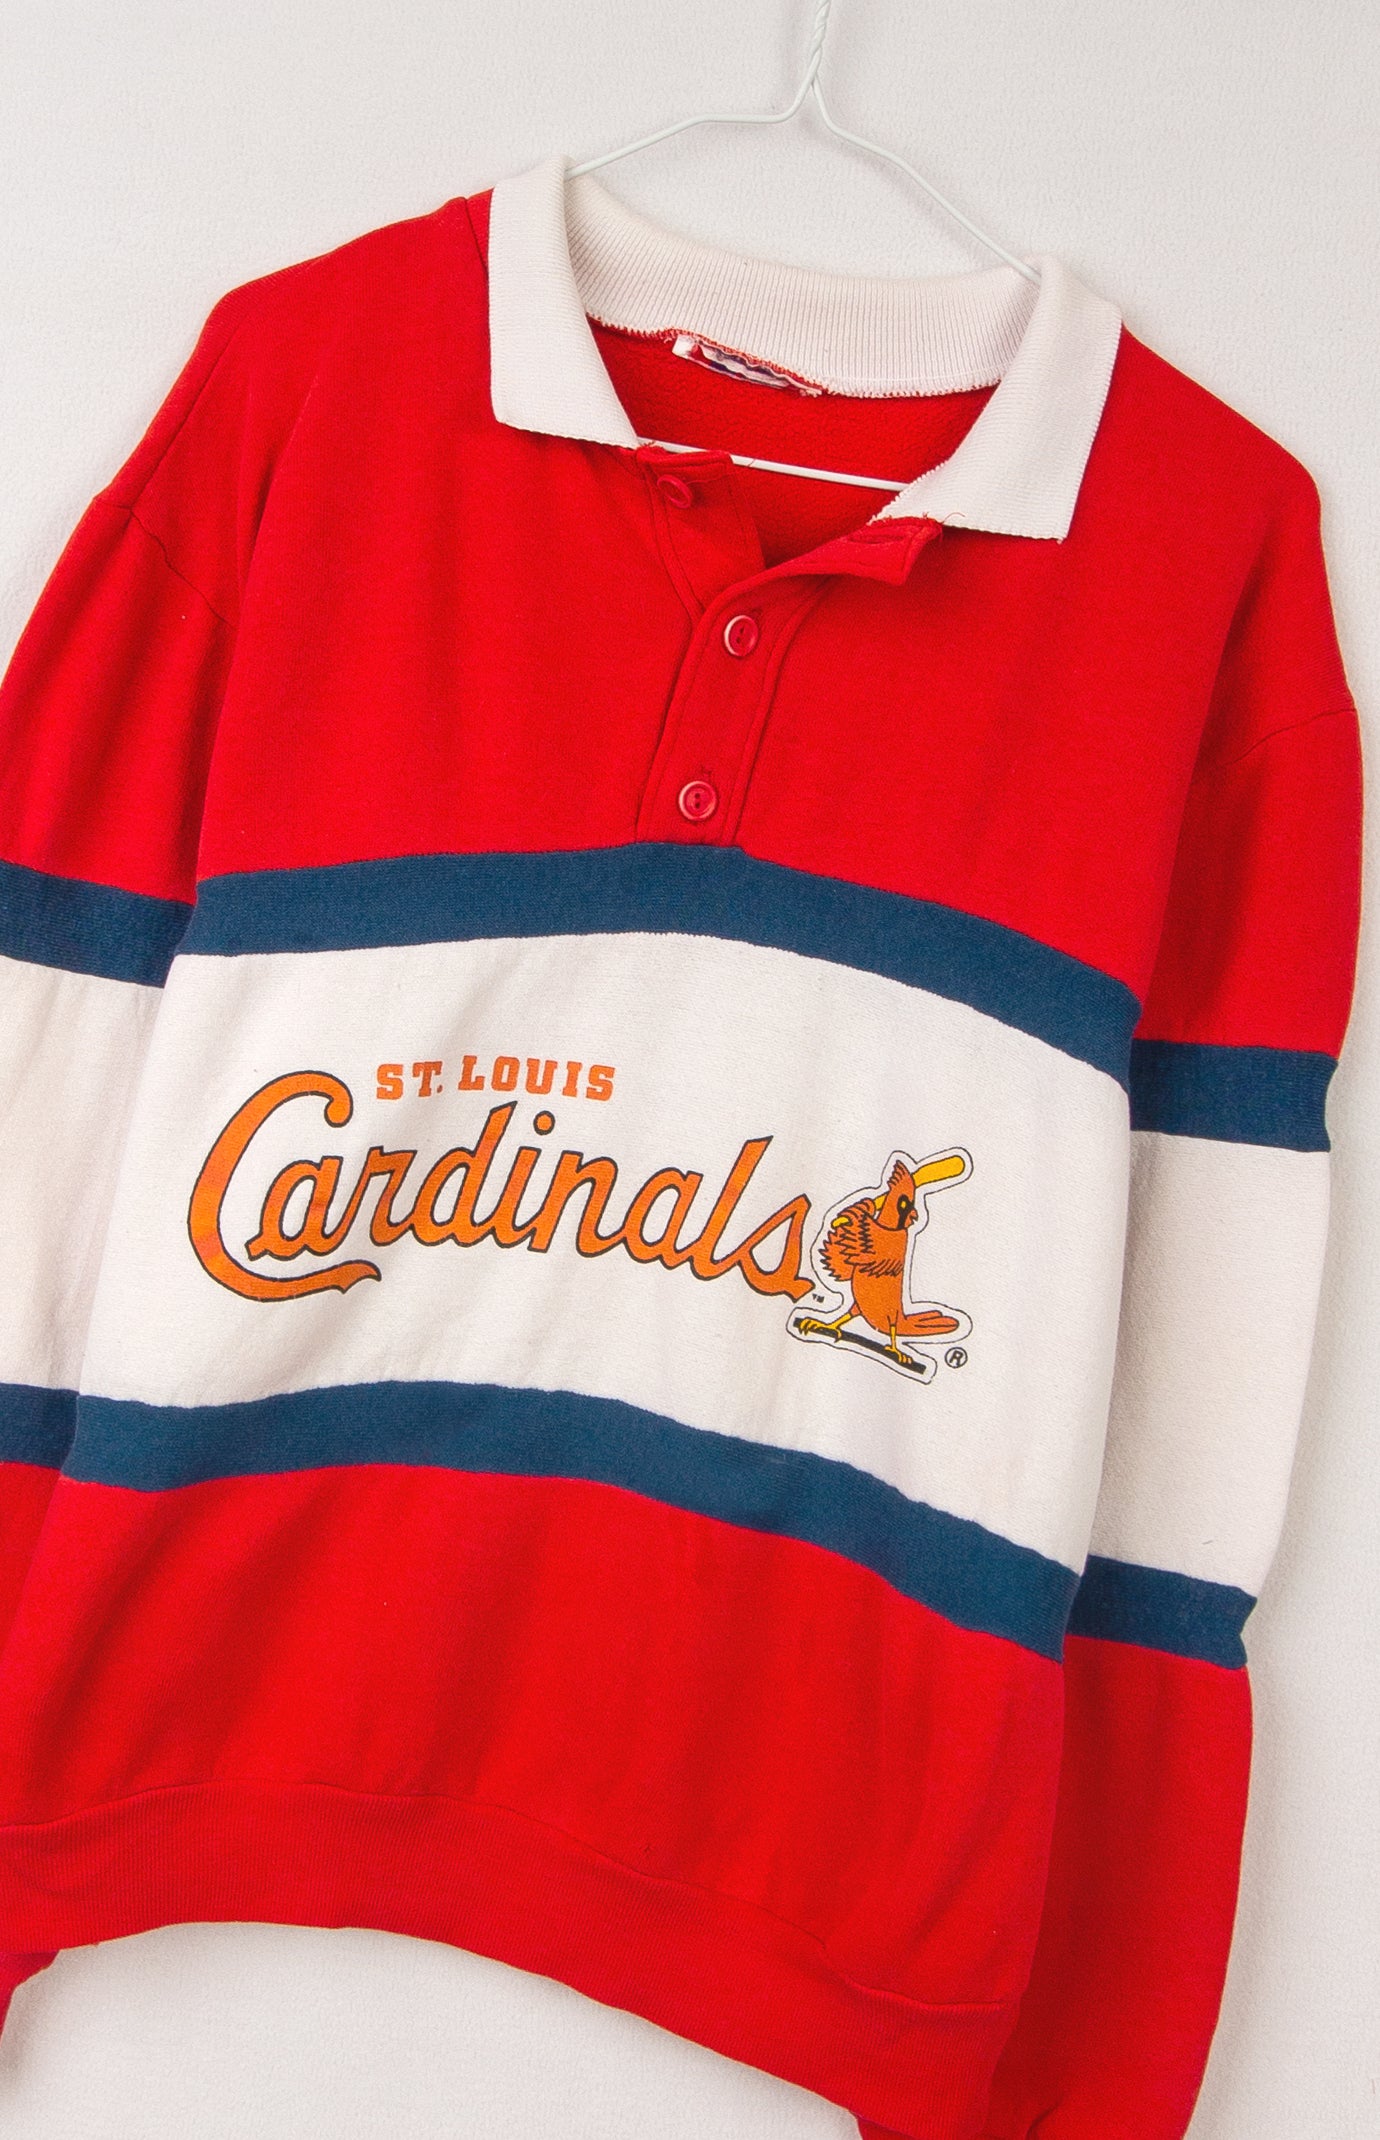 GOAT Vintage Upcycled St. Louis Cardinals T-Shirt